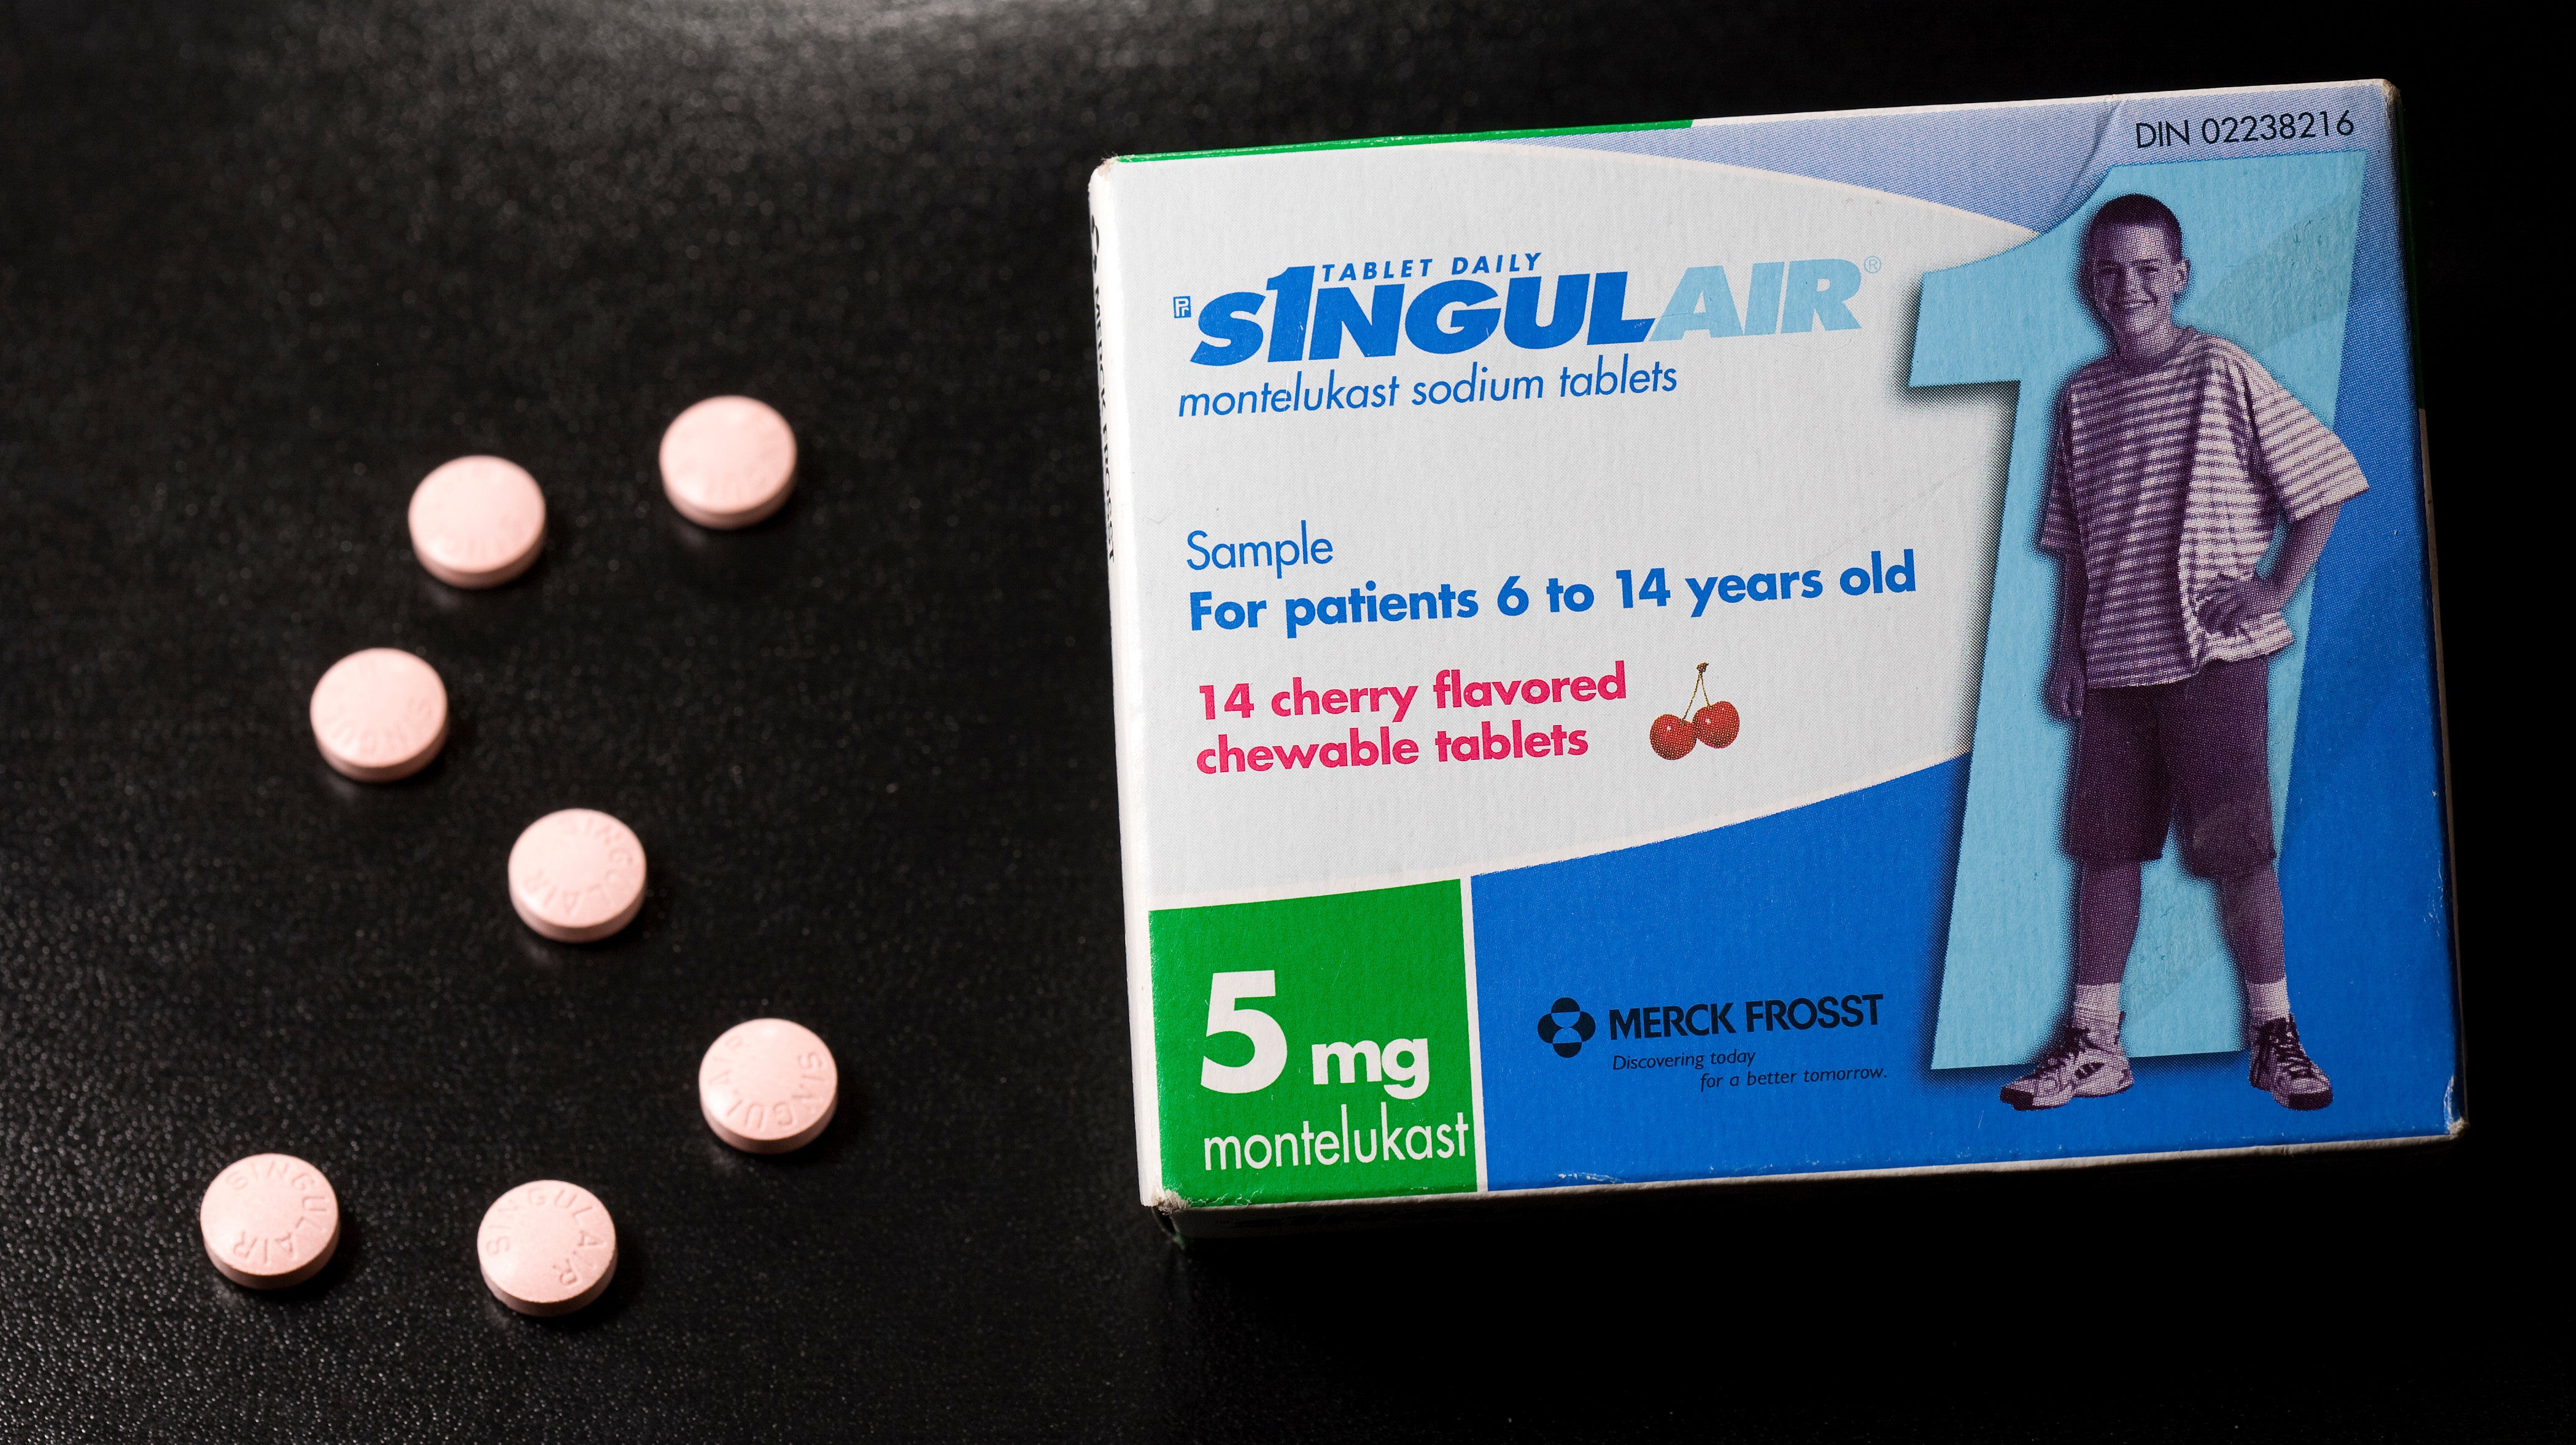 What You Should Know About Your Kid’s Singulair Prescription